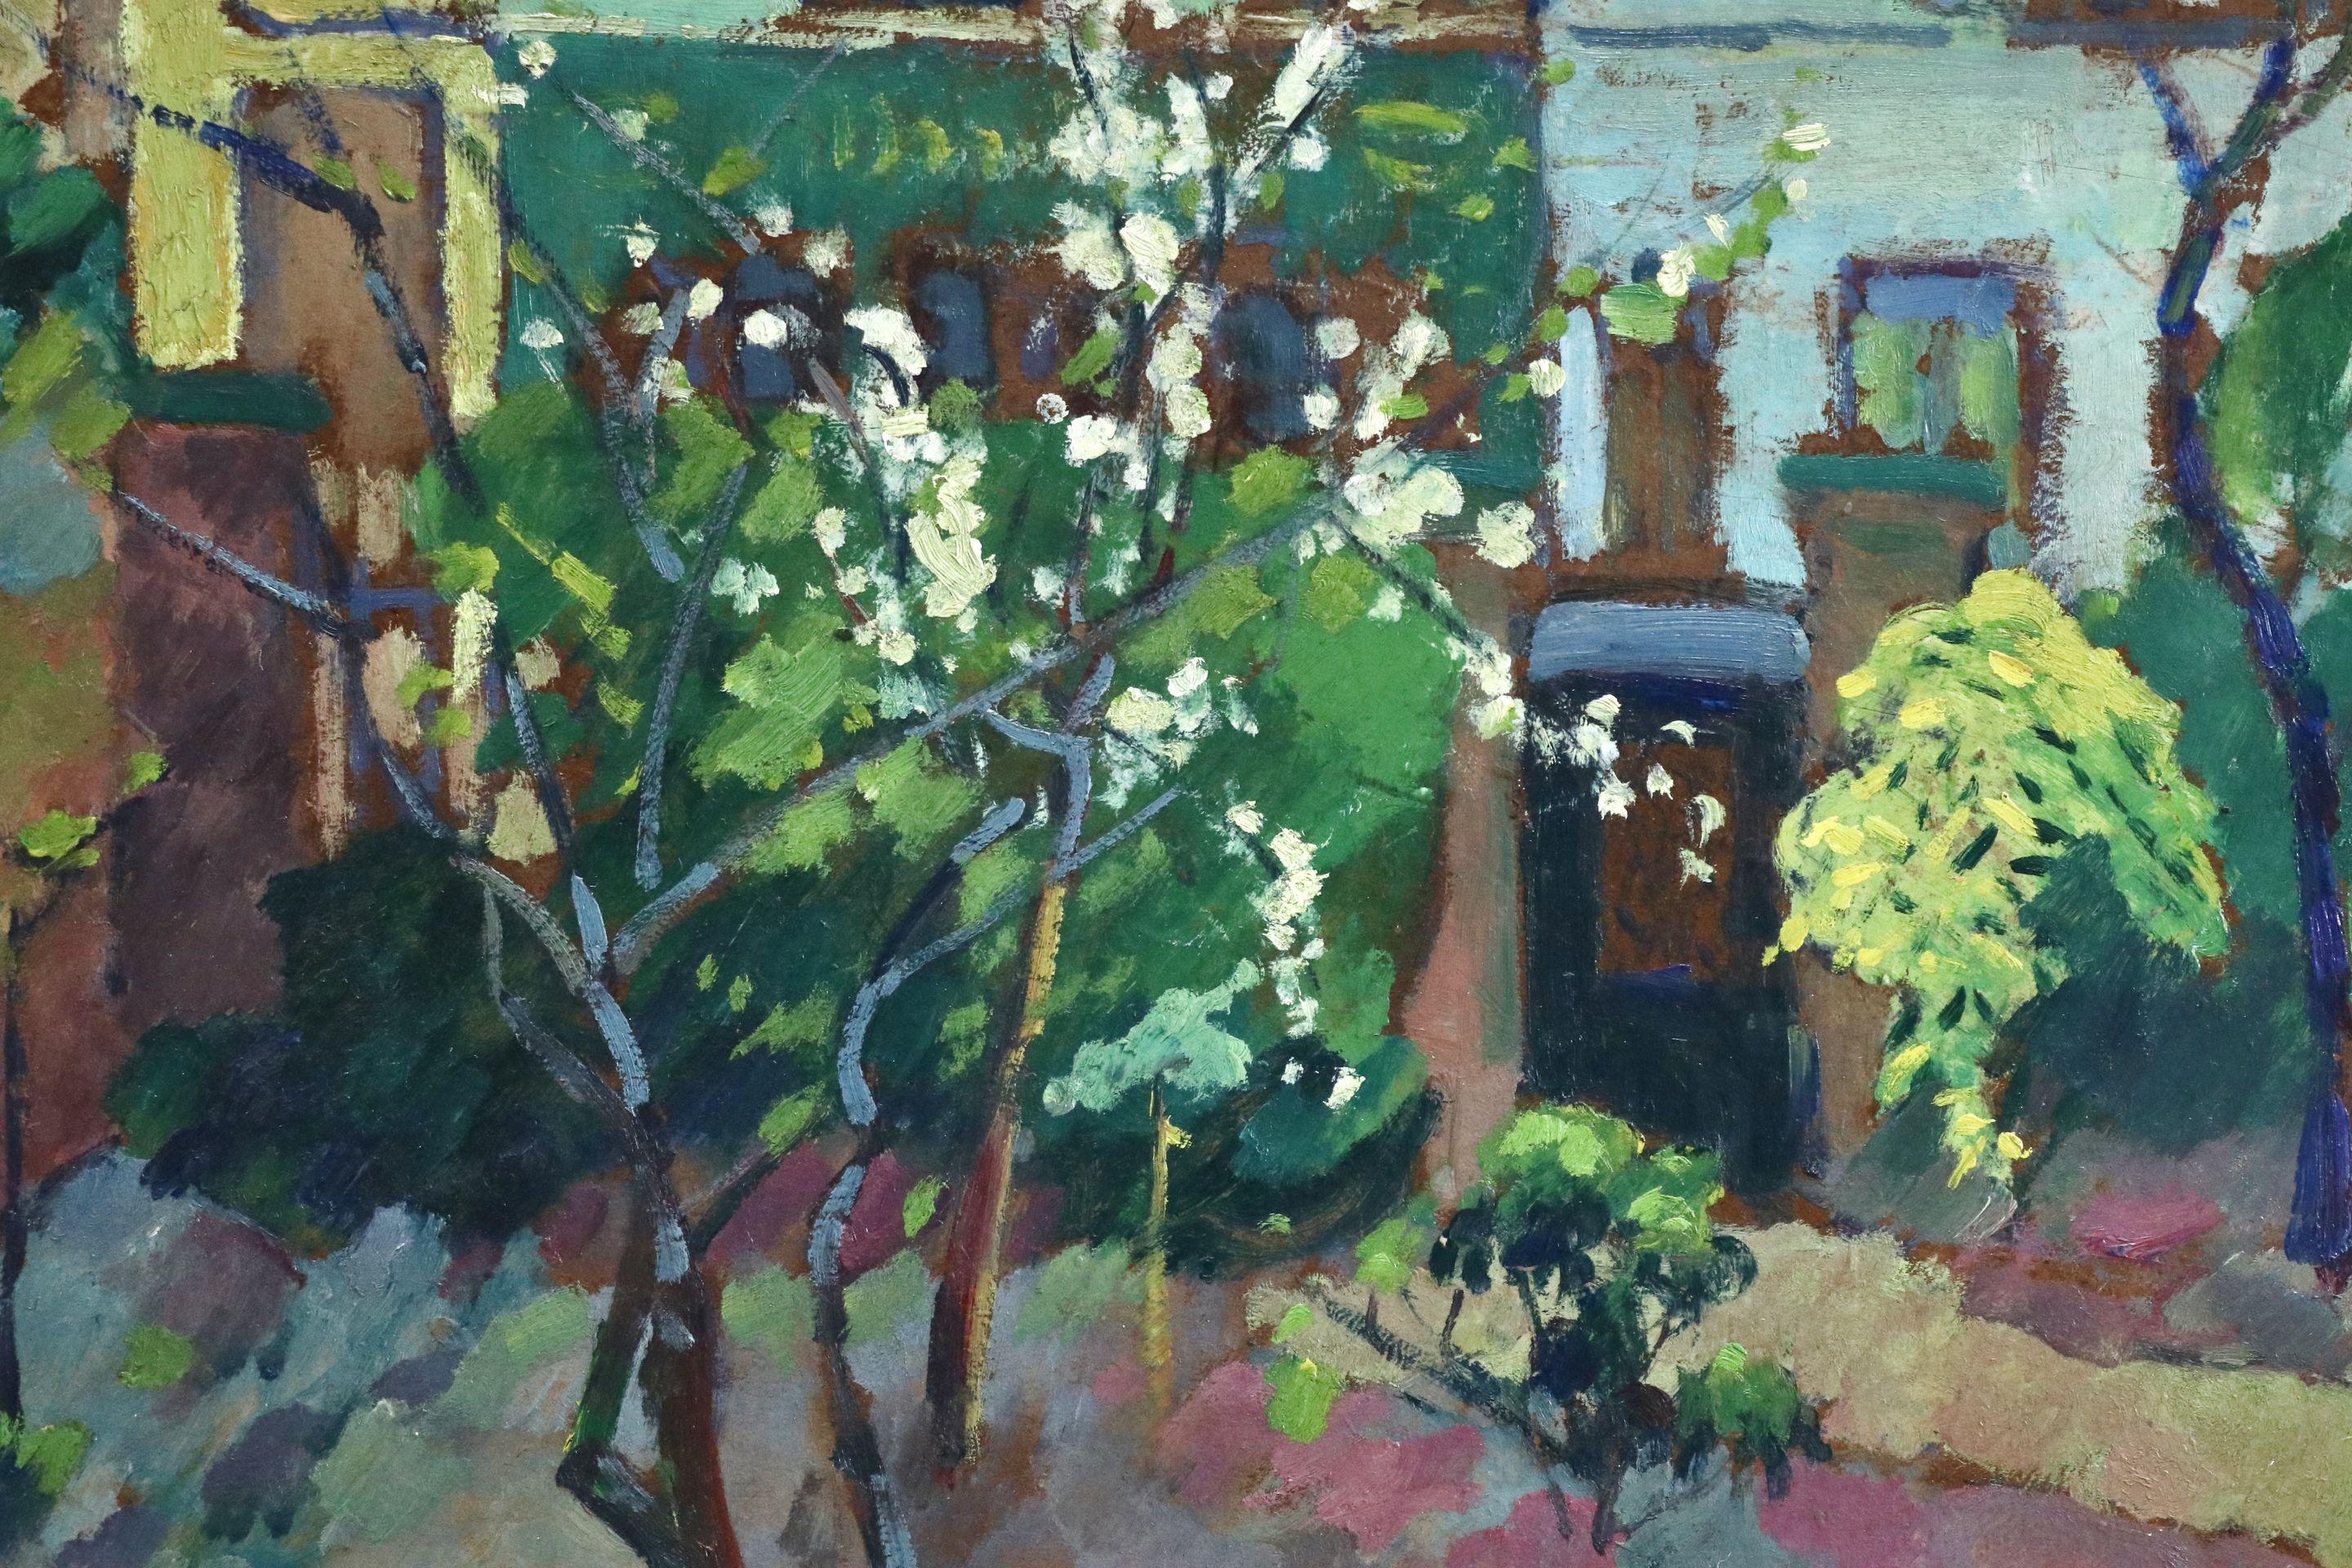 Oil on board circa 1910 by Robert Antoine Pinchon depicting a garden in front of buildings.

Pinchon was a student of Zacharie at the École des Beaux-Arts in Rouen, and also attended Joseph Delattre's Académie Libre there. Fréchon and Lebourg were